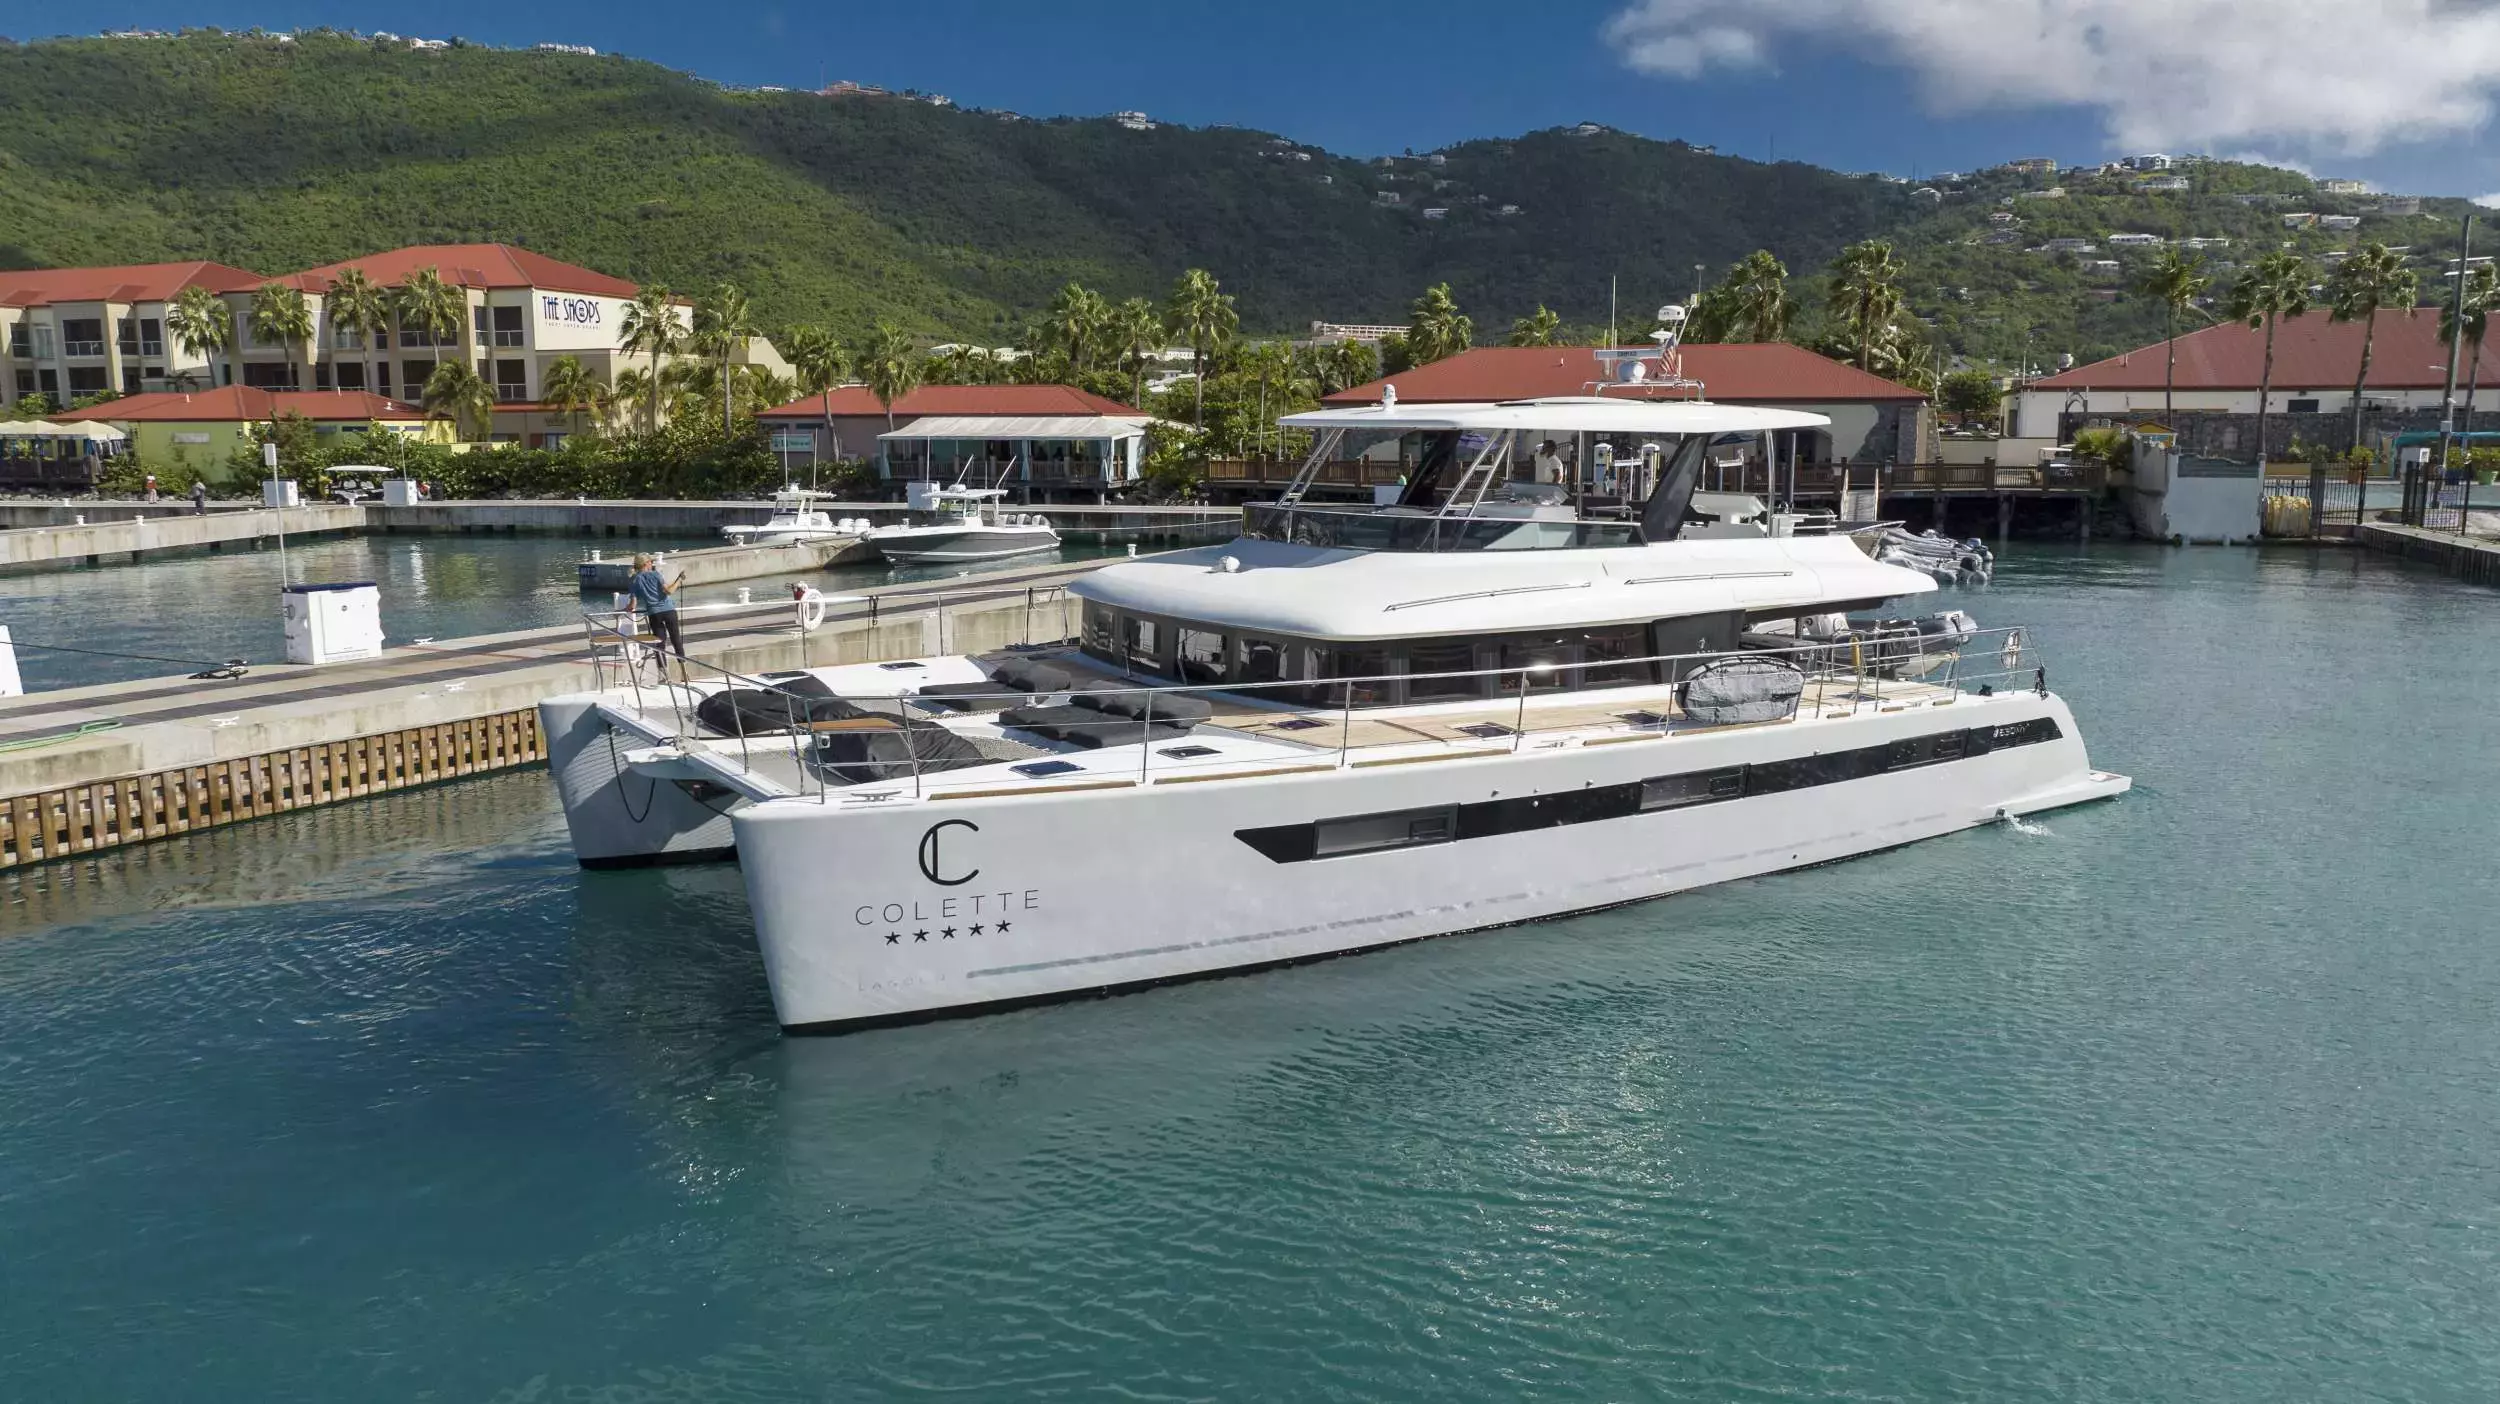 Colette by Lagoon - Special Offer for a private Power Catamaran Rental in St Thomas with a crew